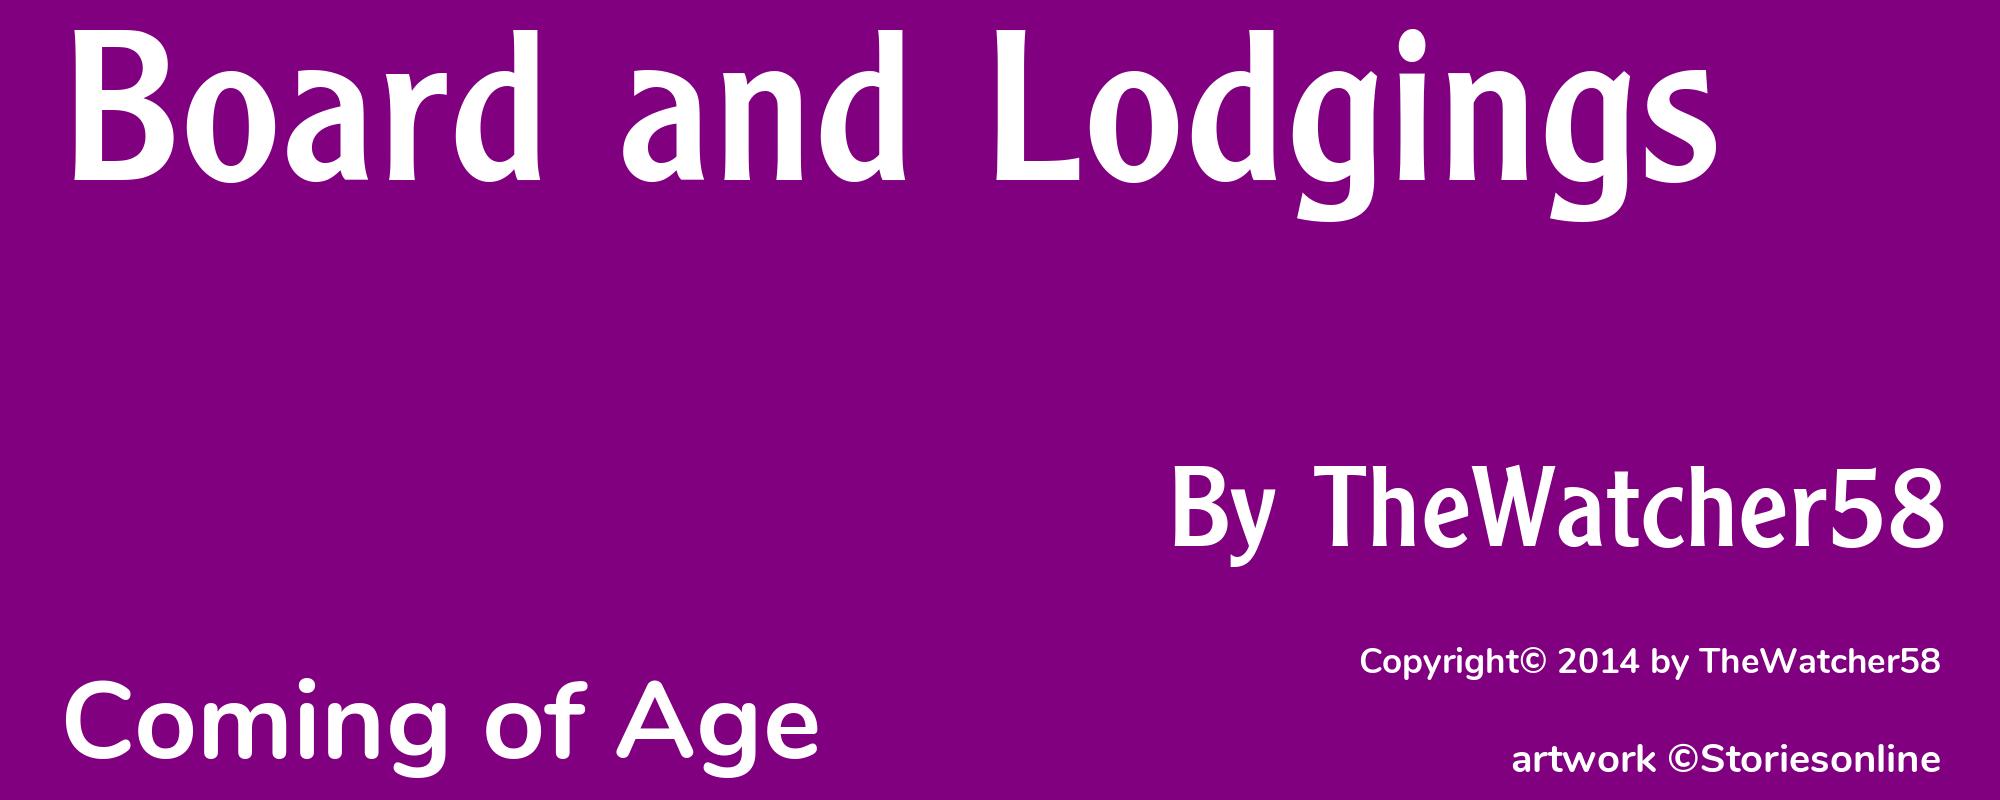 Board and Lodgings - Cover